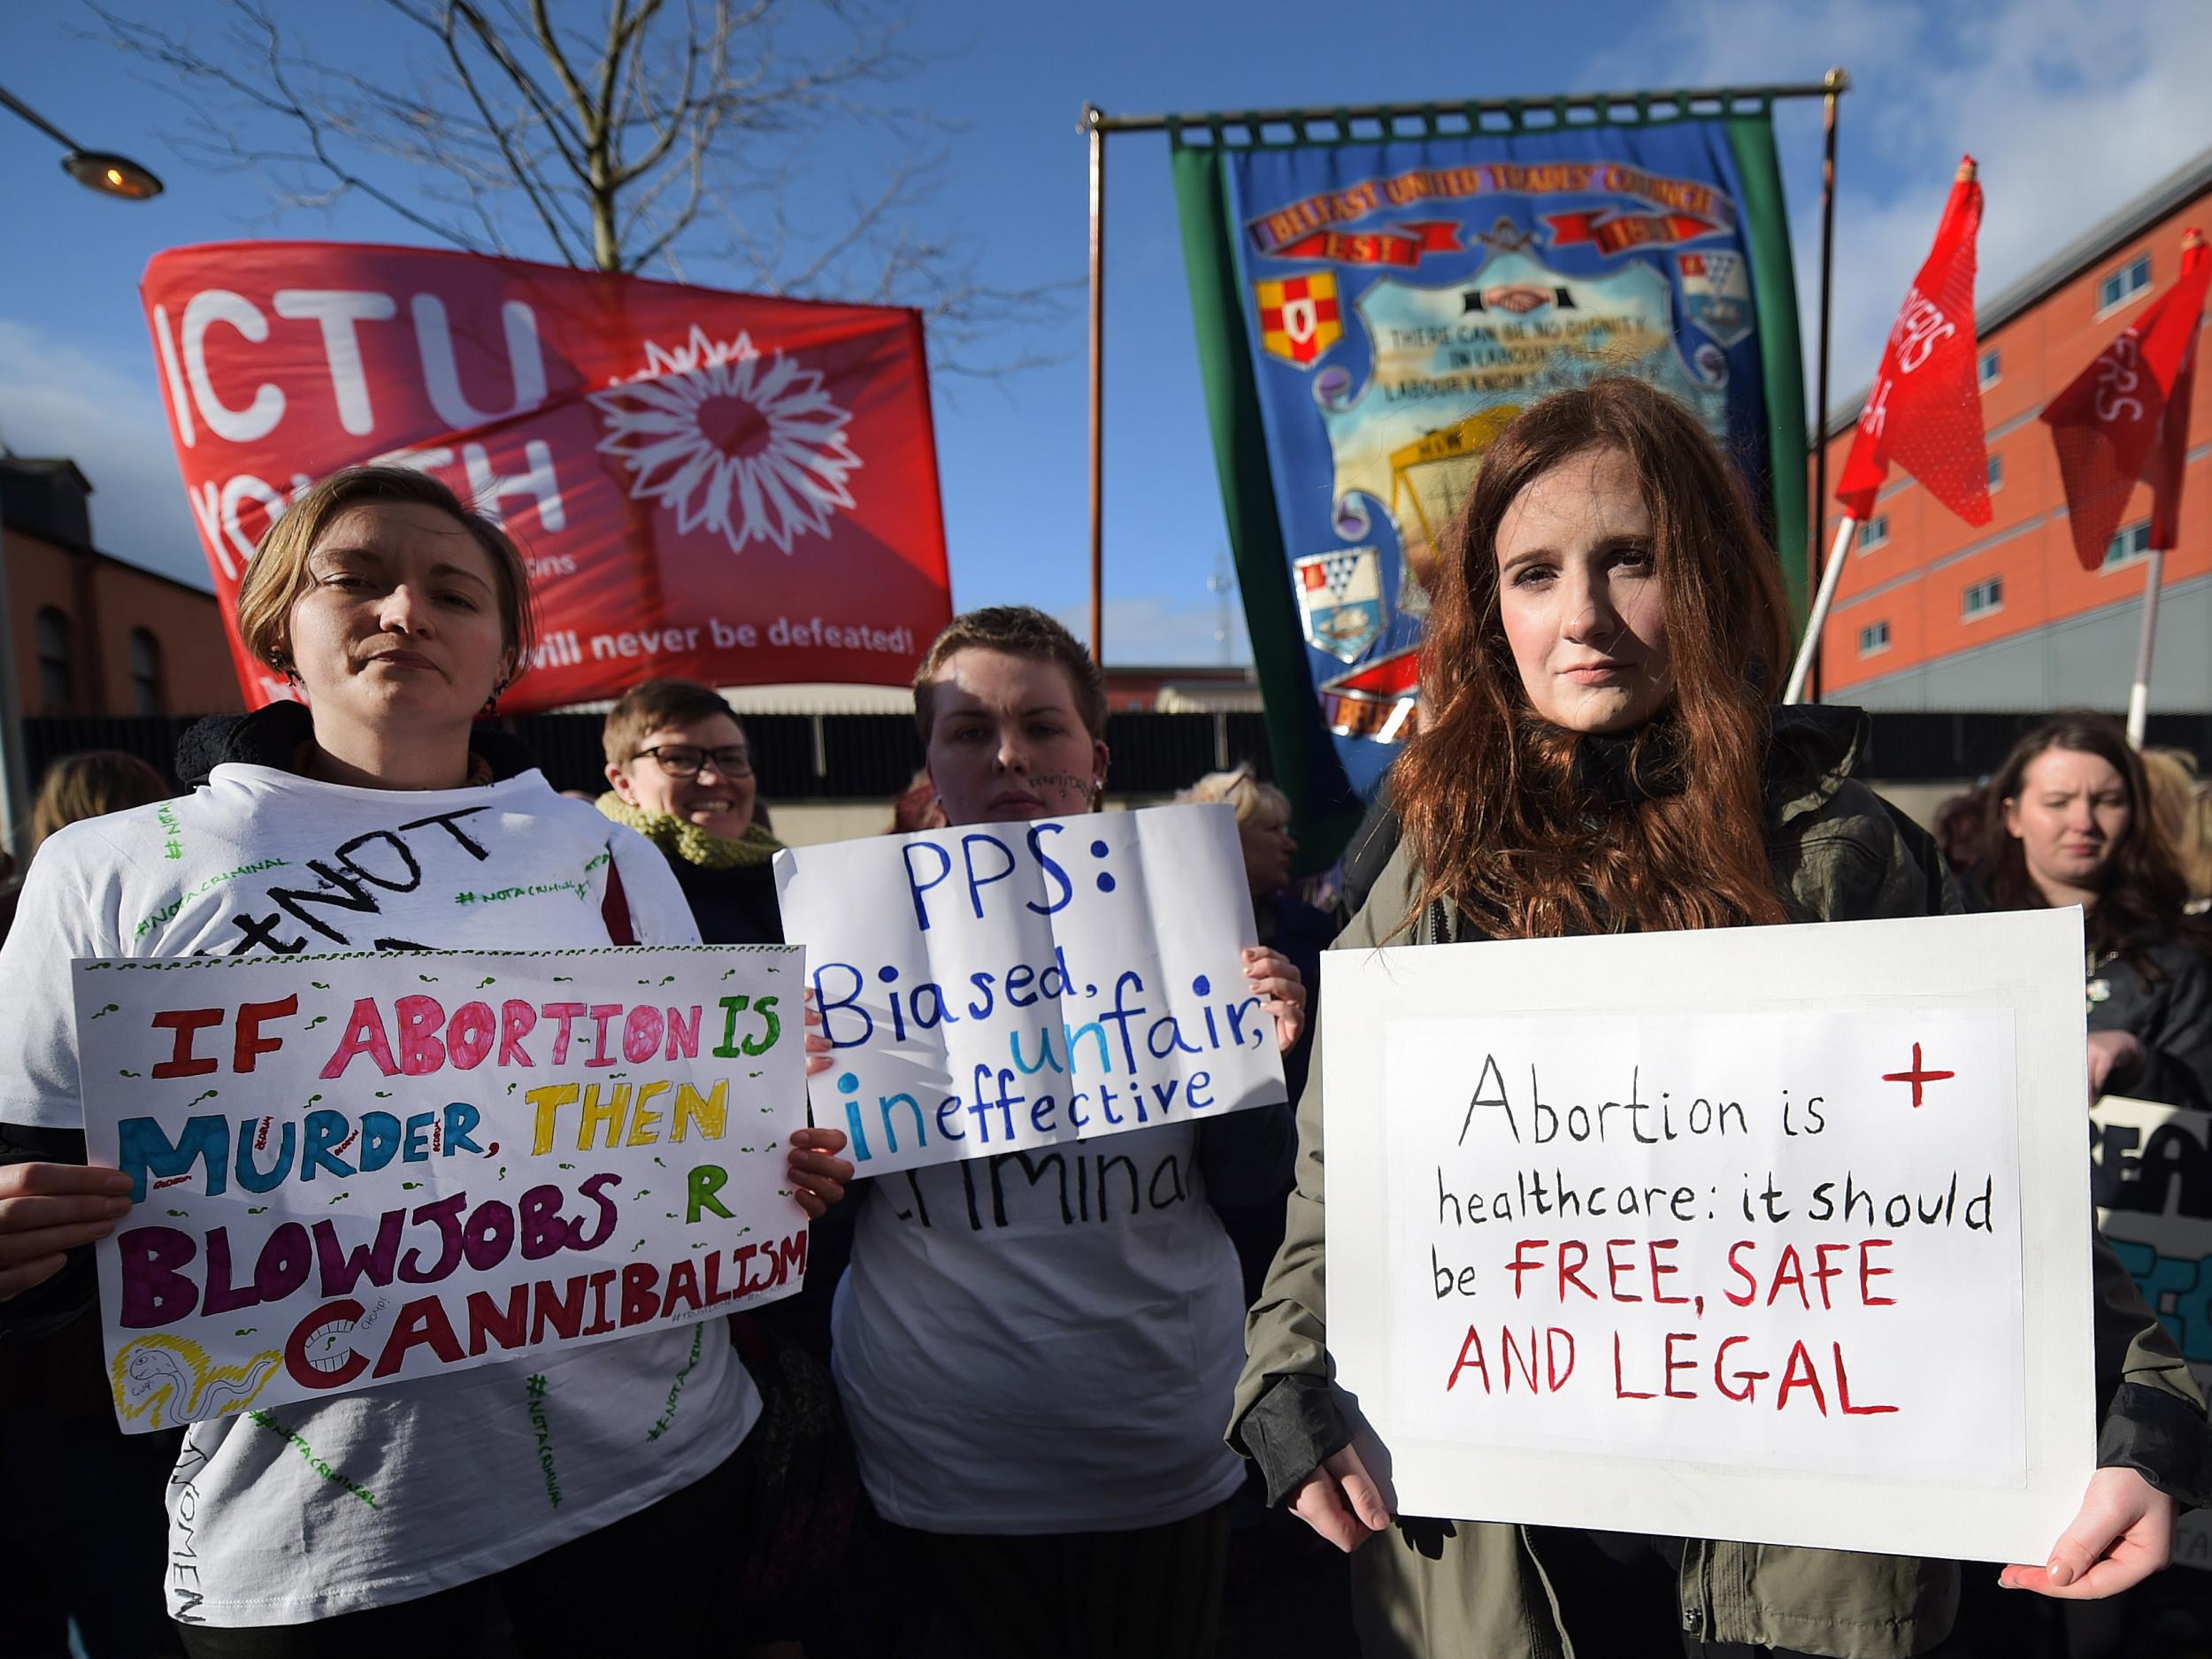 Pro-choice campaigners gather outside Belfast's Public Prosecution office in support of a 21-year-old Northern Irish women who was convicted and sentenced for terminating her pregnancy